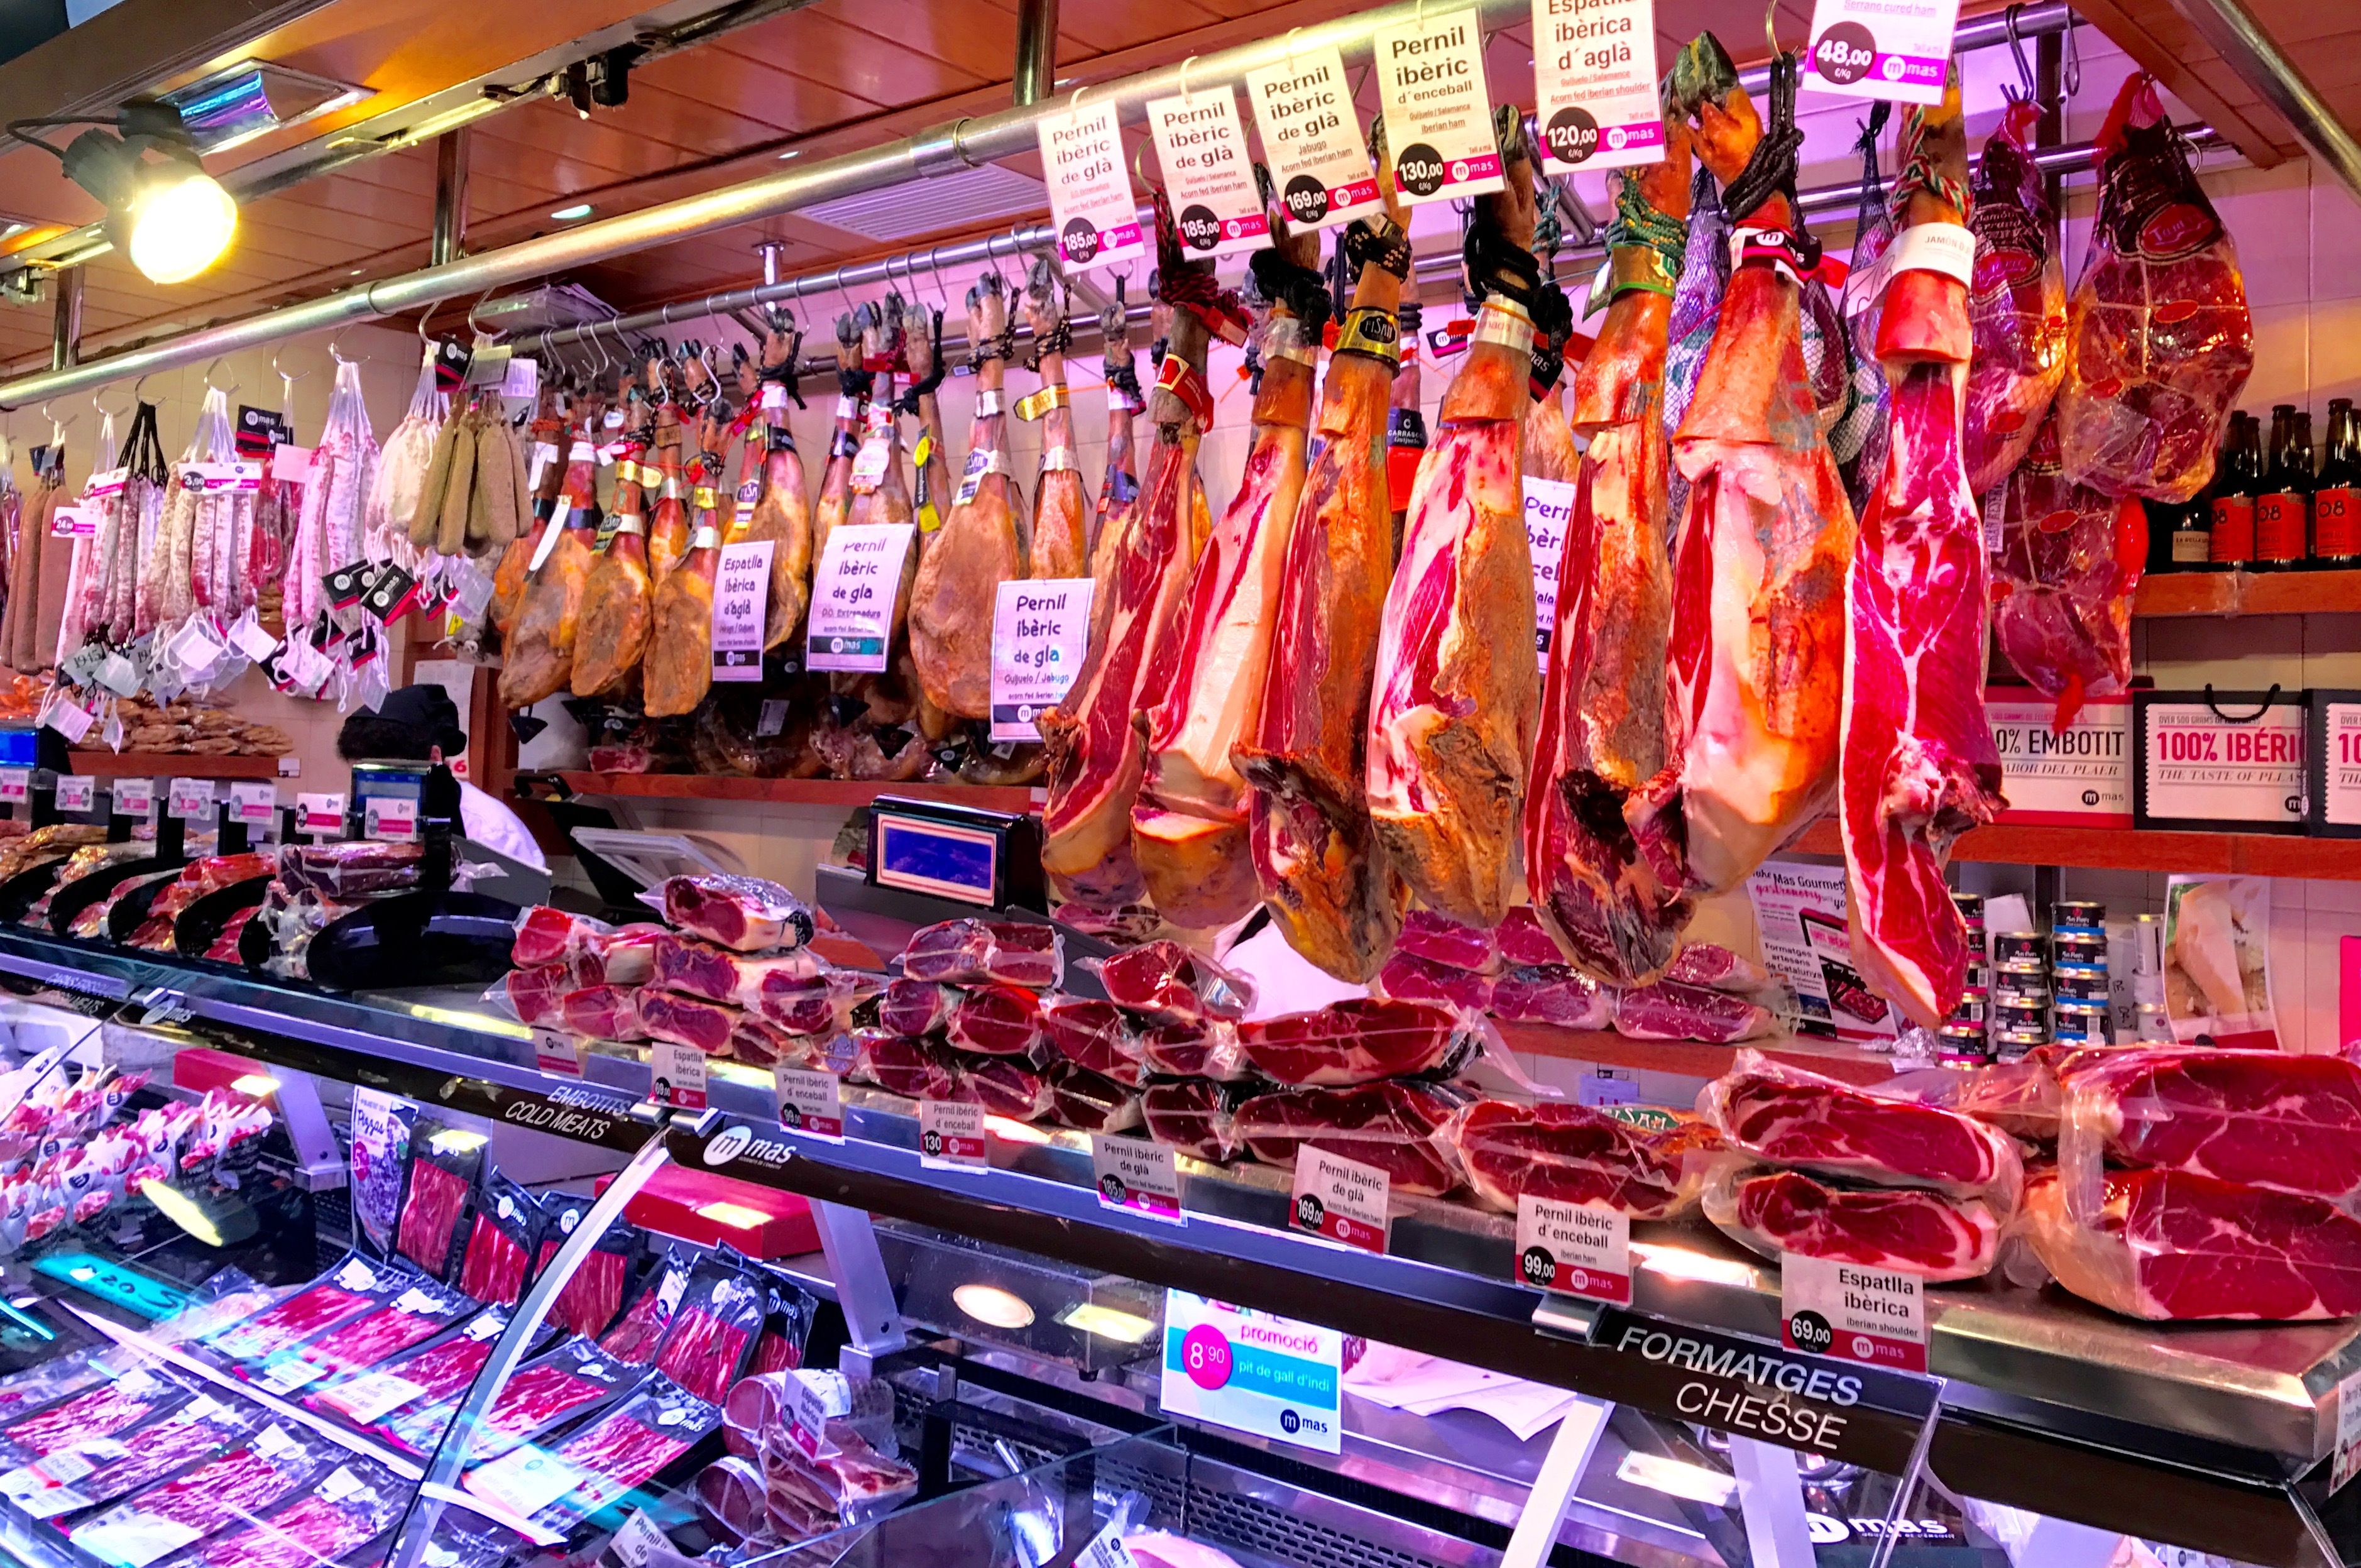 La Boqueria - one of the world's oldest and most renown market. And a good place to find LOTS of Spanish ham.